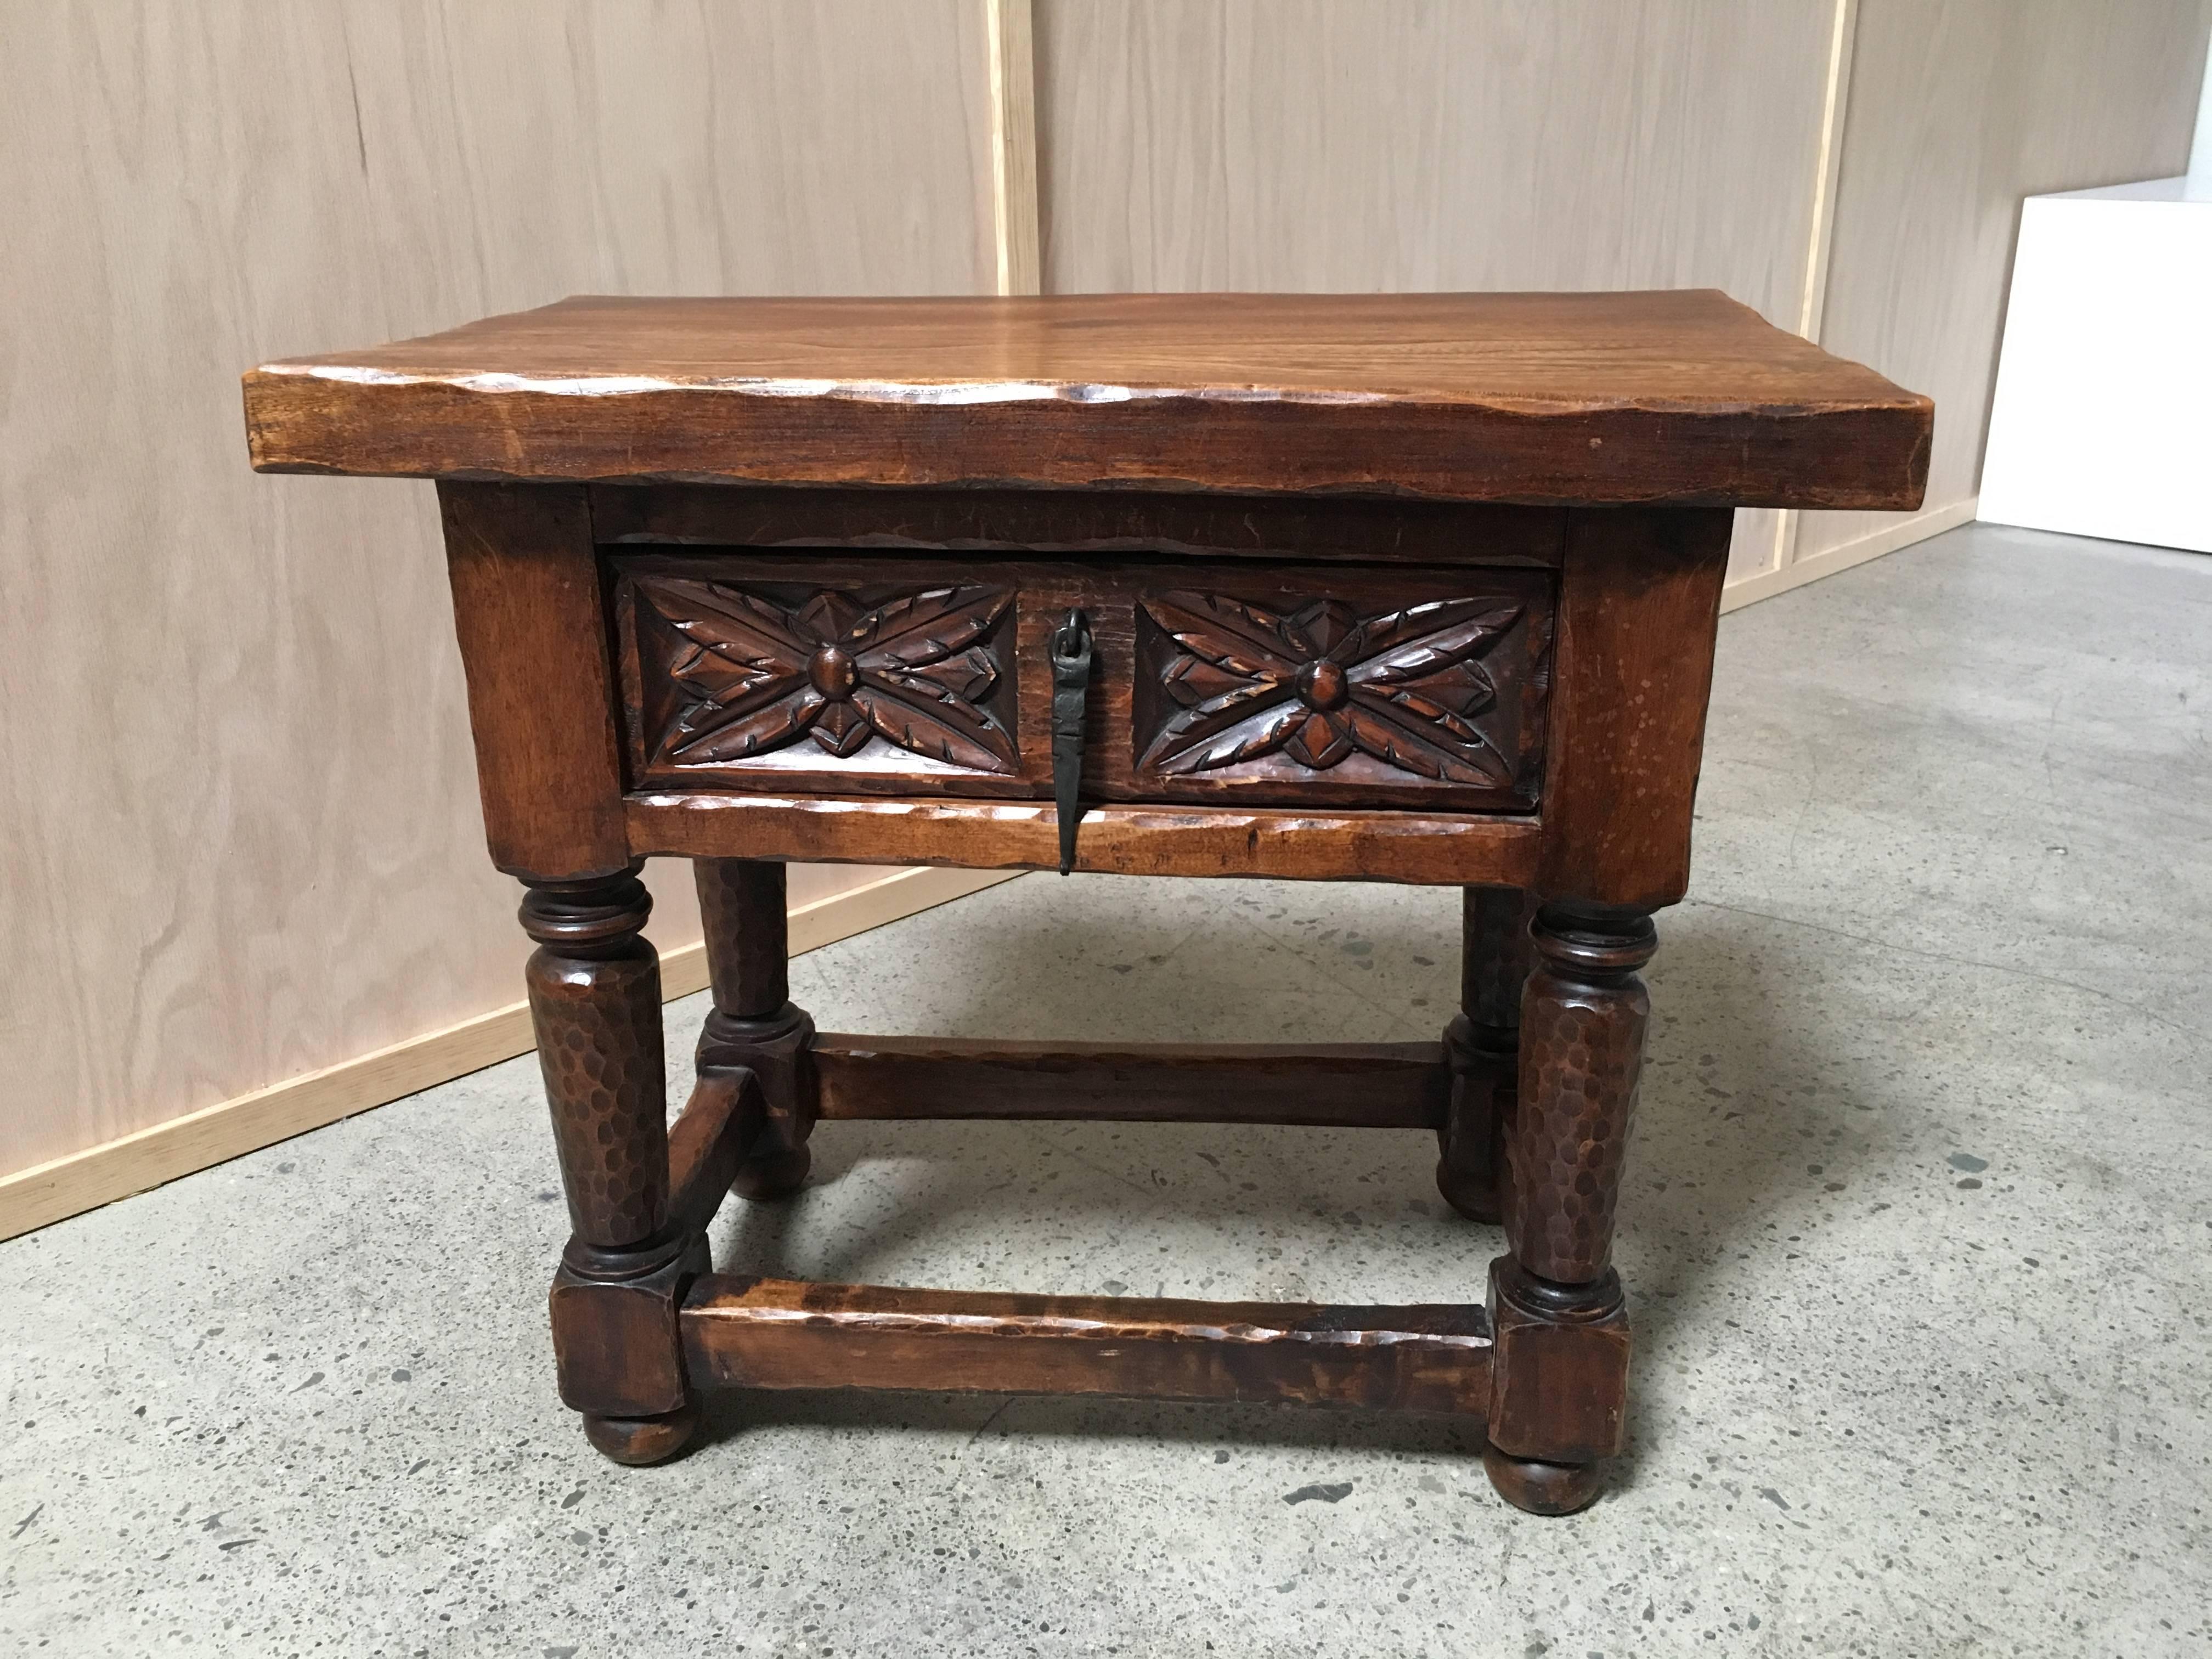 Antique Gothic style end table hand-carved with Iron drawer pull.